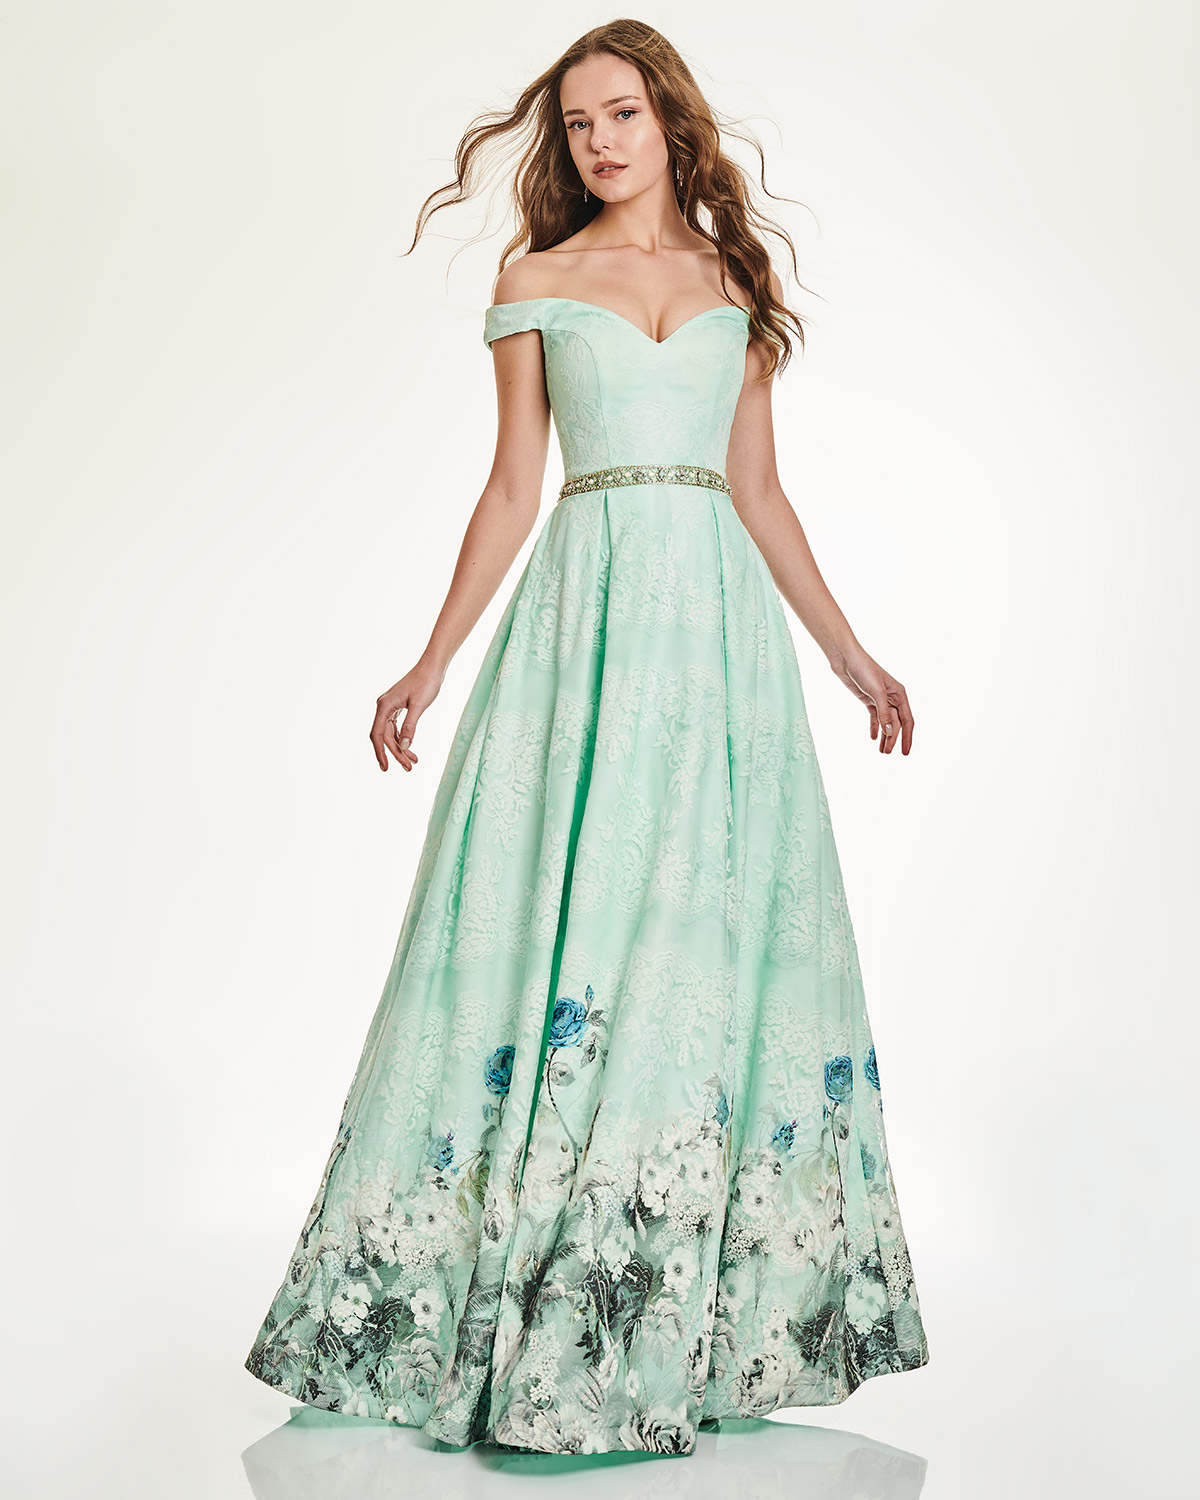 Cocktail Dresses / Long lace strapless dress with floral details and embroidery belt